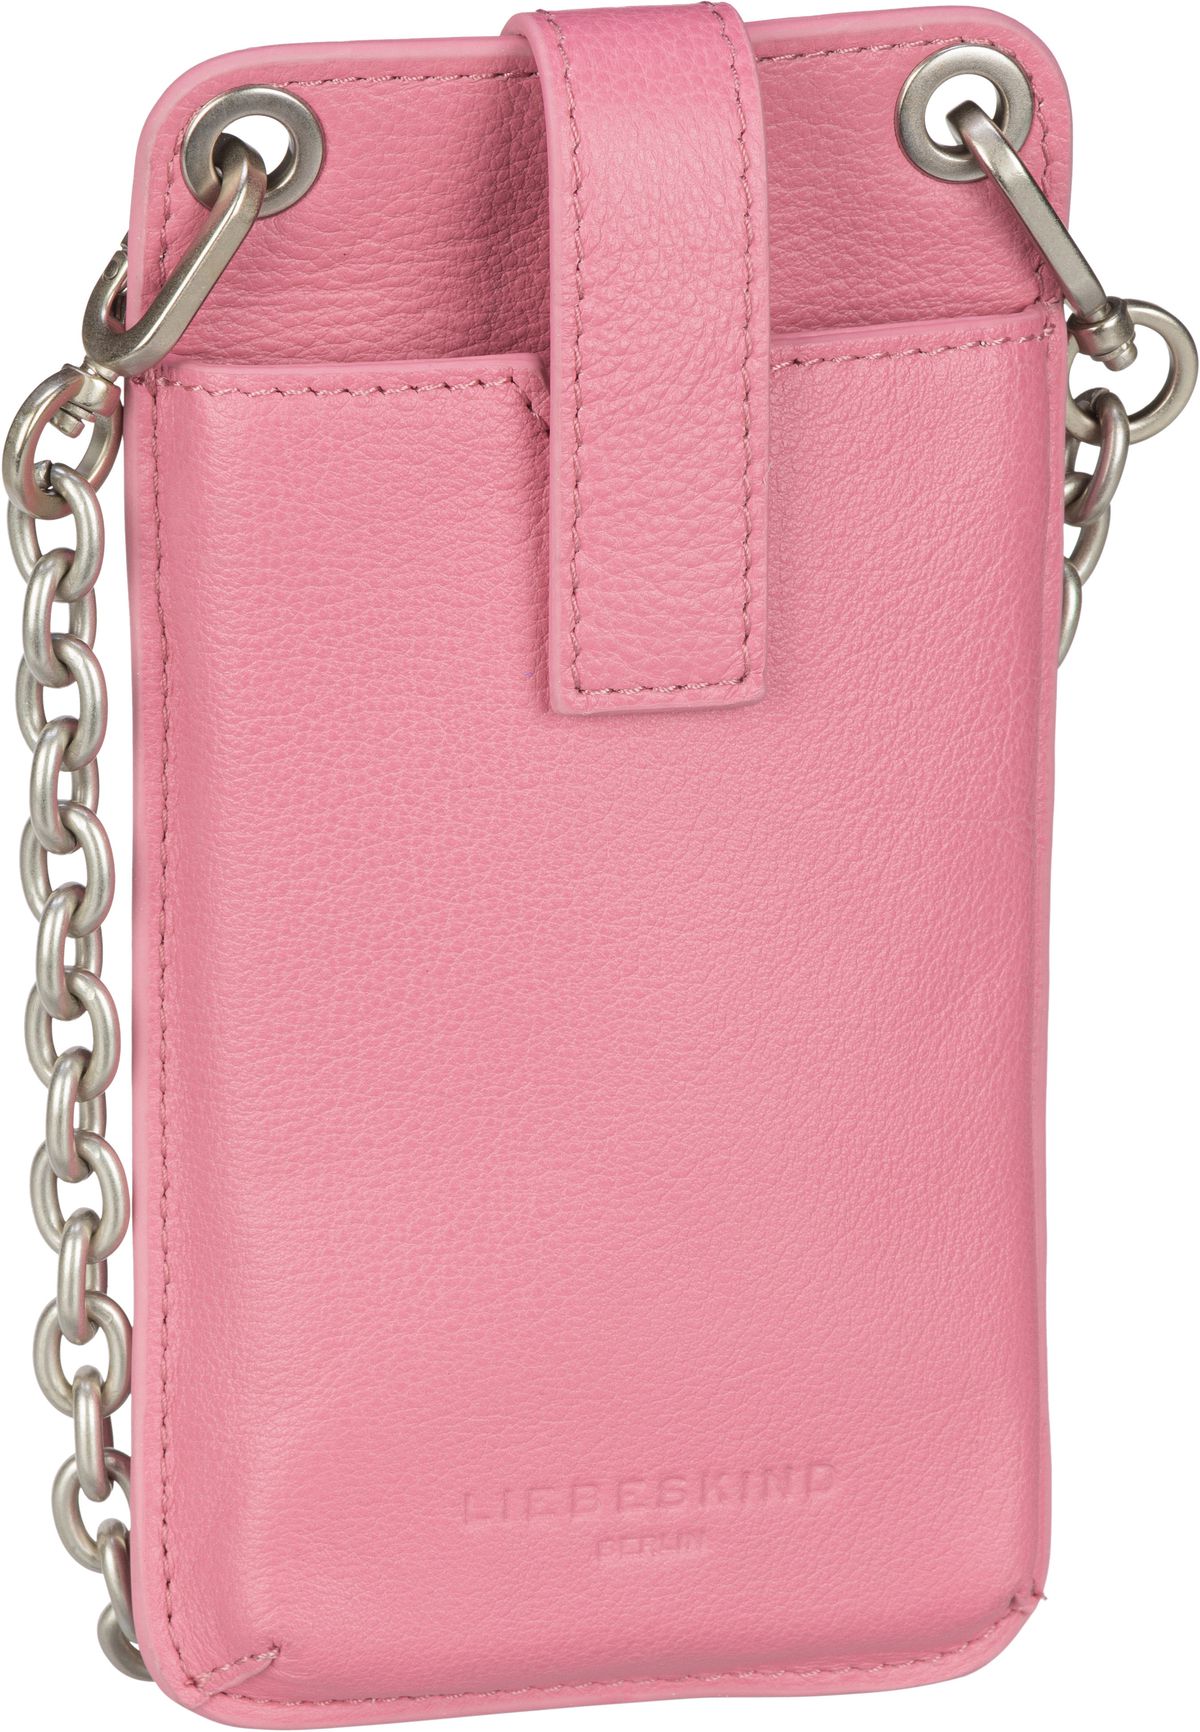 Liebeskind Berlin Basic Mobile Pouch - Cupcake